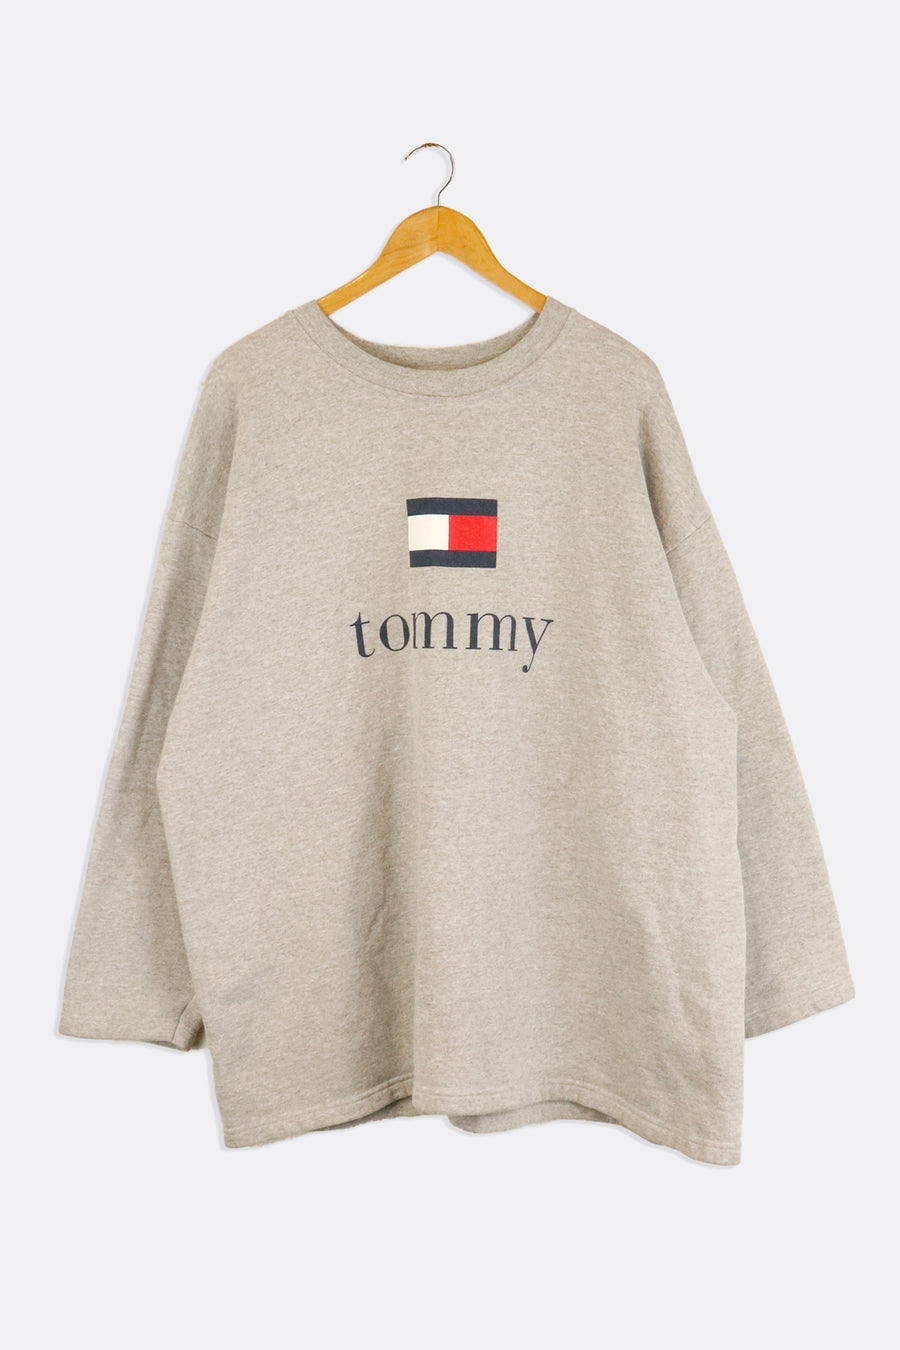 Vintage Tommy Hilfiger Tommy Simple Navy Font With Rectangle Logo Above Sweatshirt Sz XL